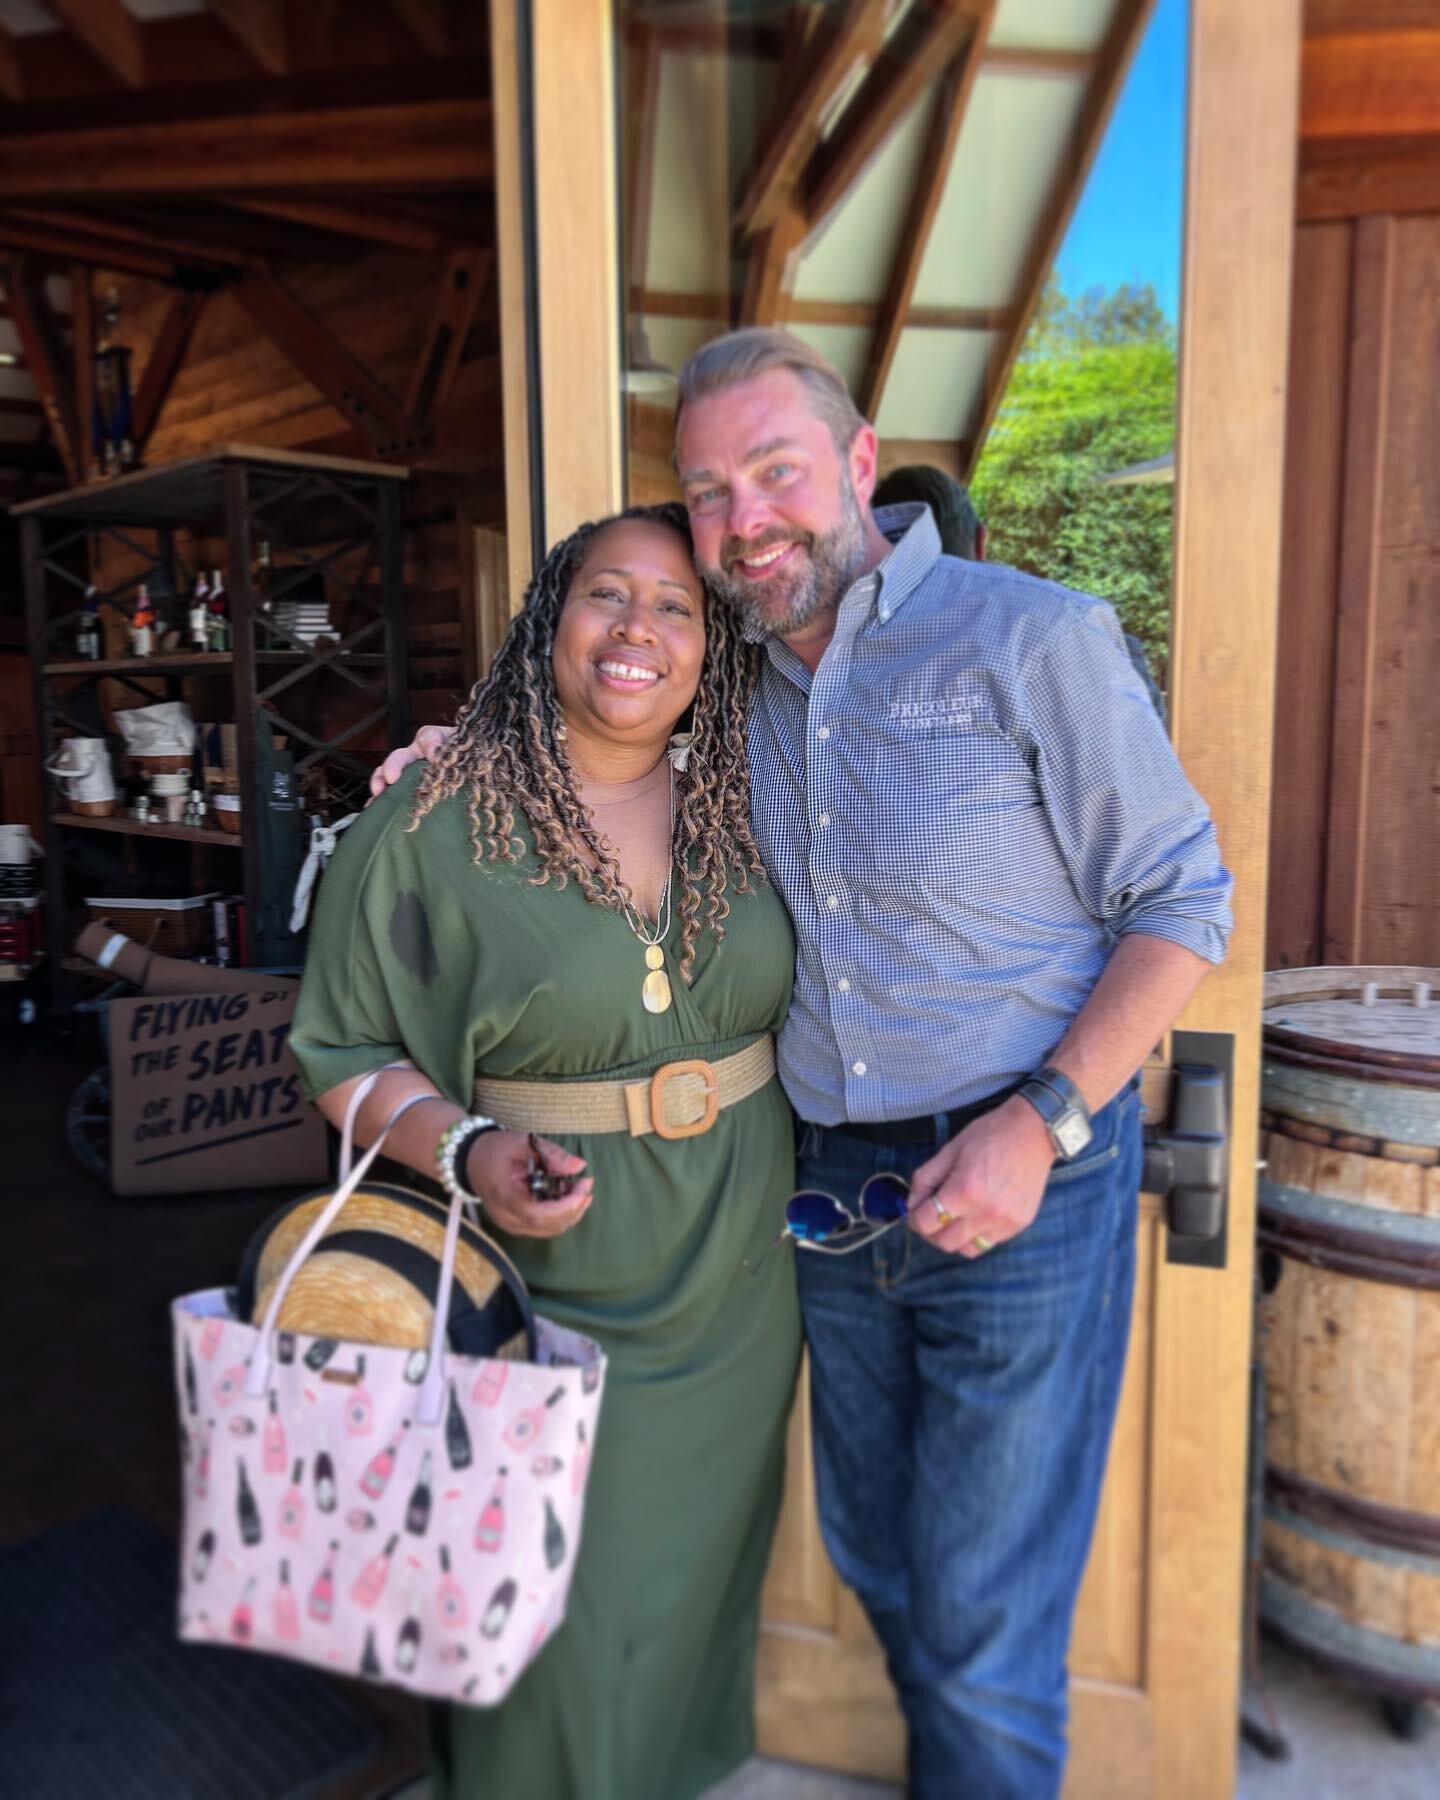 After months of emailing and phone calls, we finally got to meet in person!!!

Dr. Dahna Batts leads wine country wellbeing retreats for women. After their yoga practice this weekend, they decided to come to @bricoleurvineyards for some delicious win